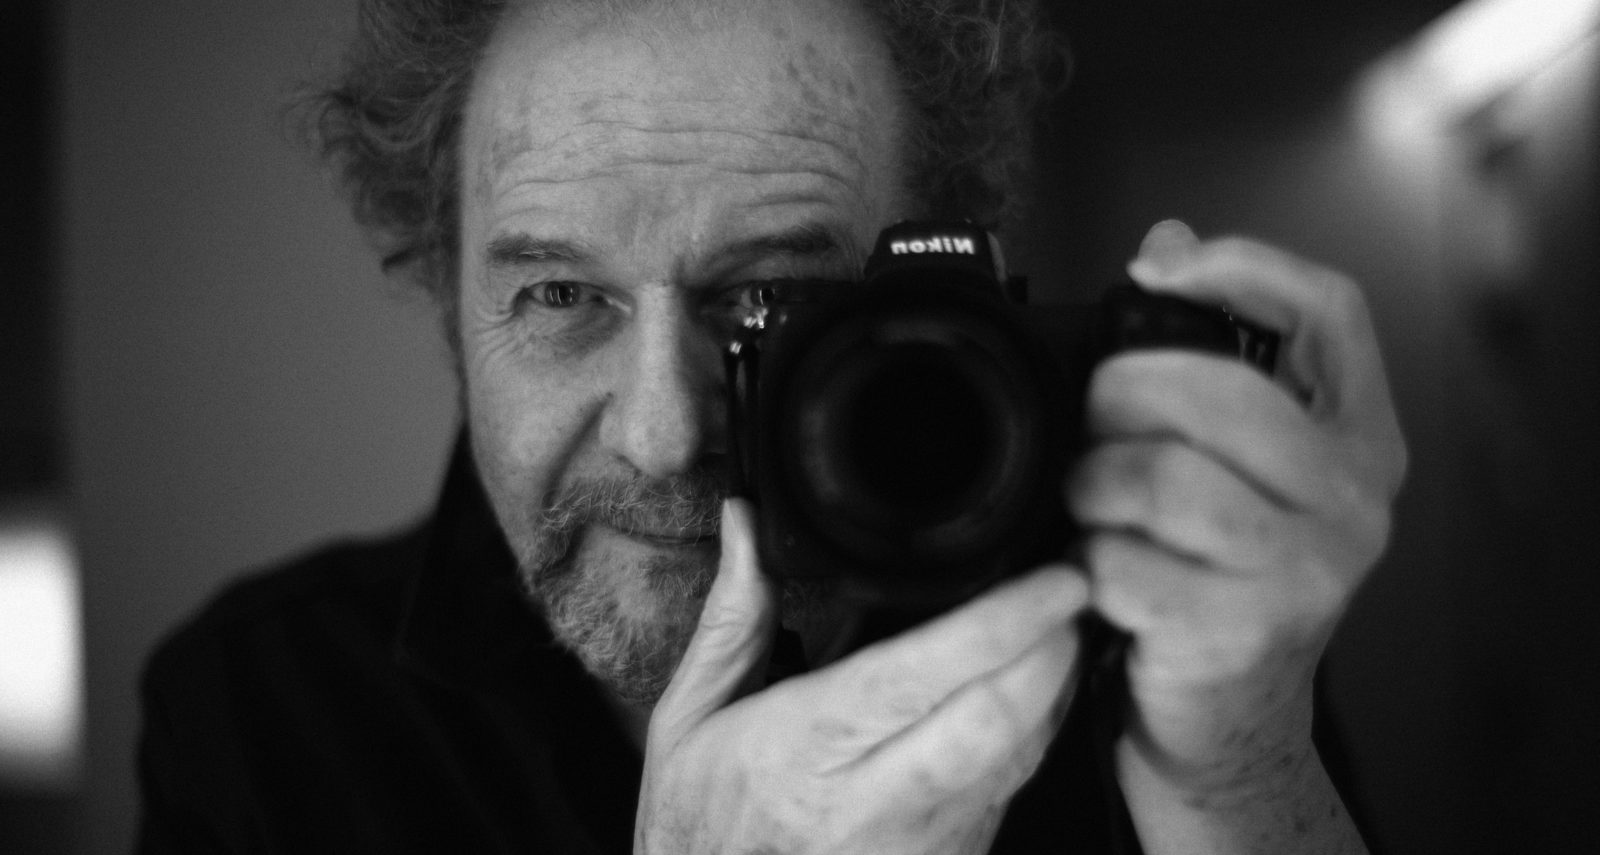 Director Mike Figgis on story narratives and filming in Hong Kong